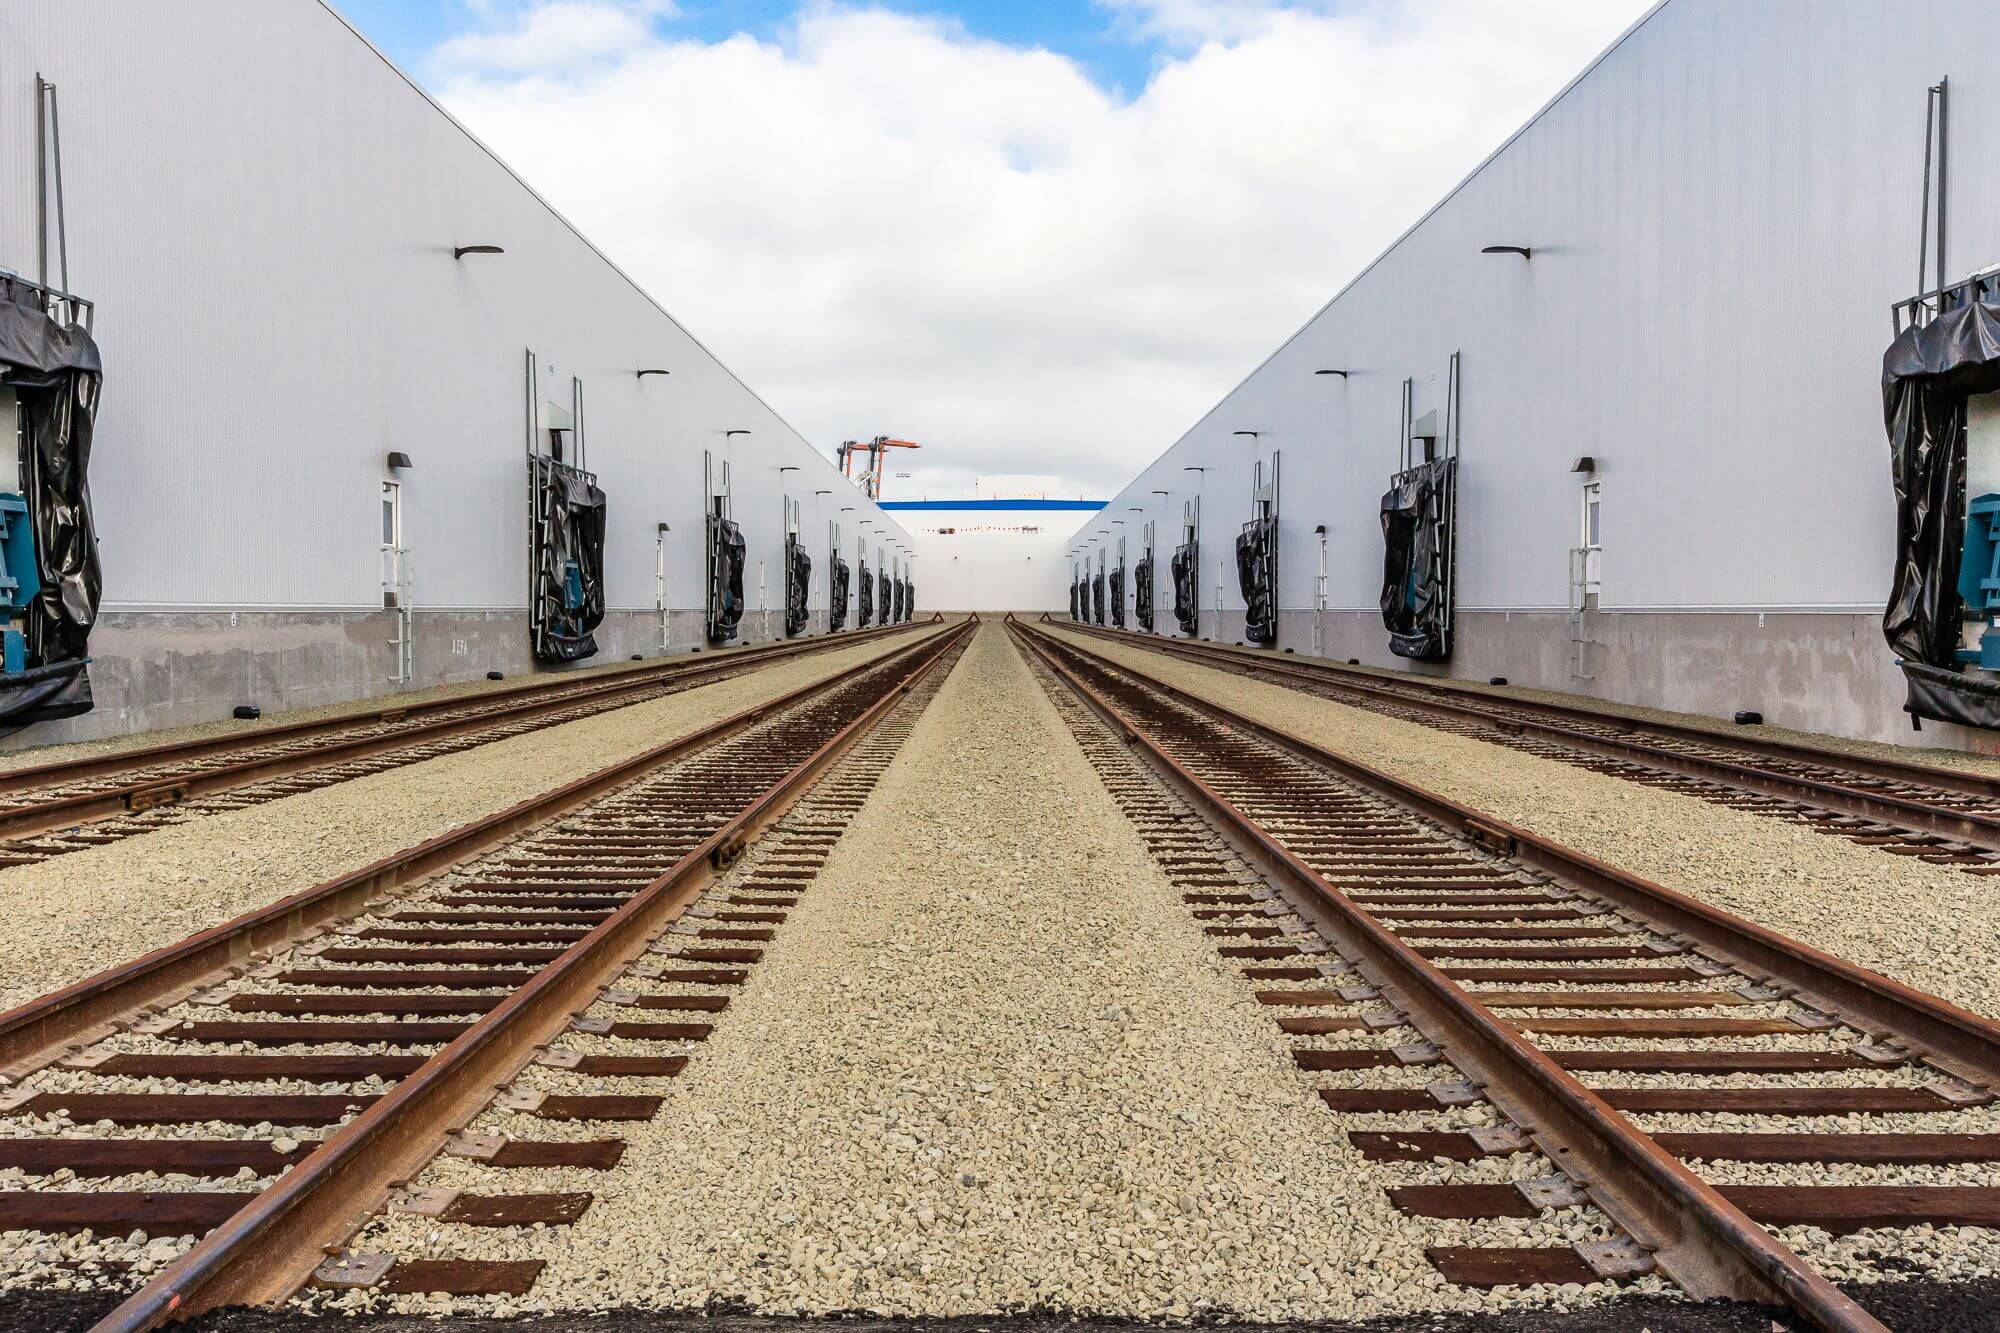 Train tracks leading to Lineage cold storage warehouse for moving and storing temperature-controlled food.